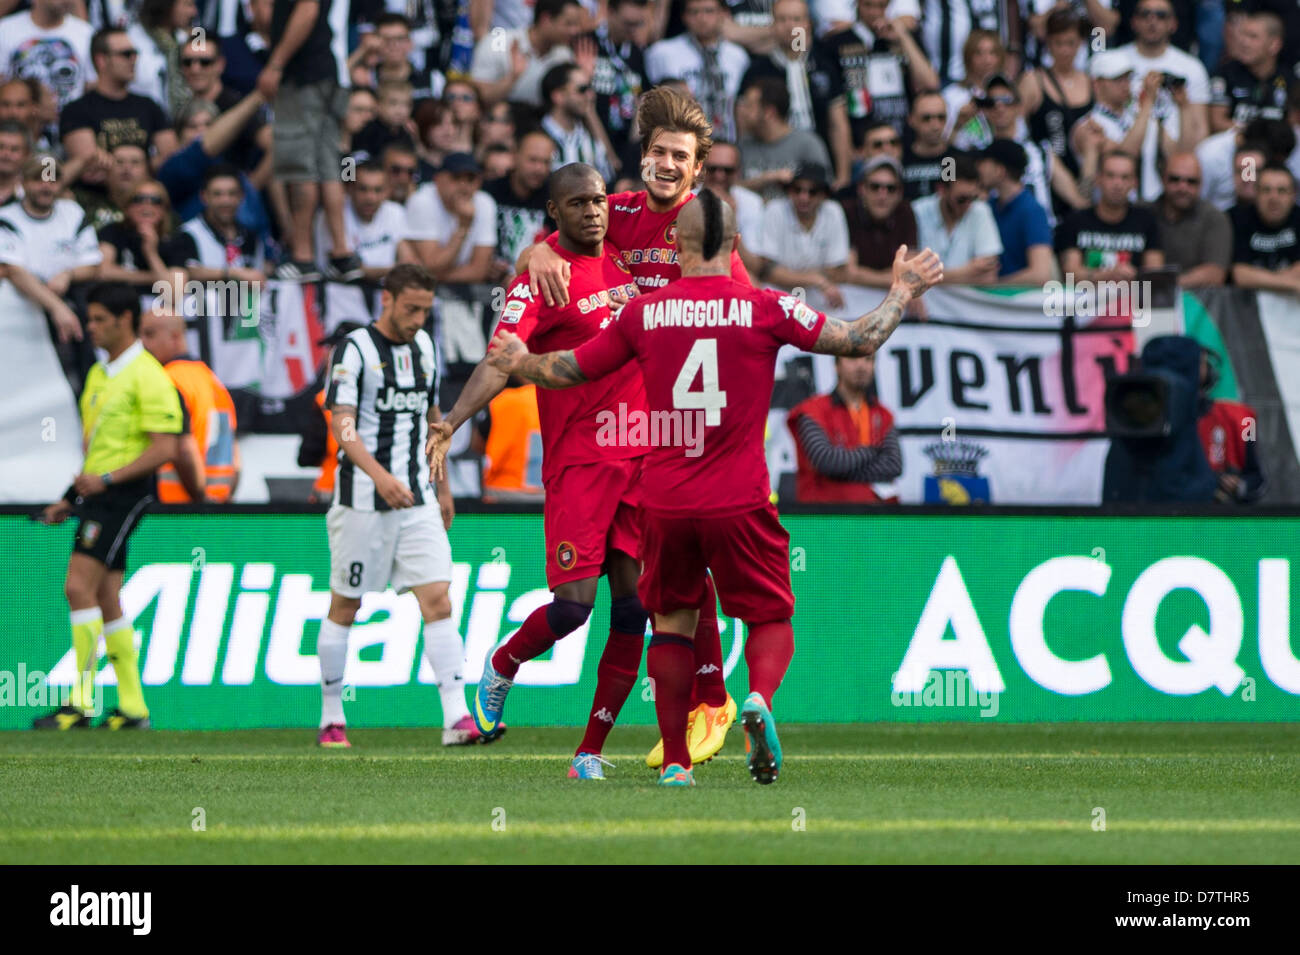 Cagliari team group, MAY 11, 2013 - Football / Soccer : Victor Ibarbo of Cagliari celebrates with his teammates after scoring the opening goal during the Italian 'Serie A' match between Juventus 1-1 Cagliari at Juventus Stadium in Turin, Italy. (Photo by Maurizio Borsari/AFLO) Stock Photo